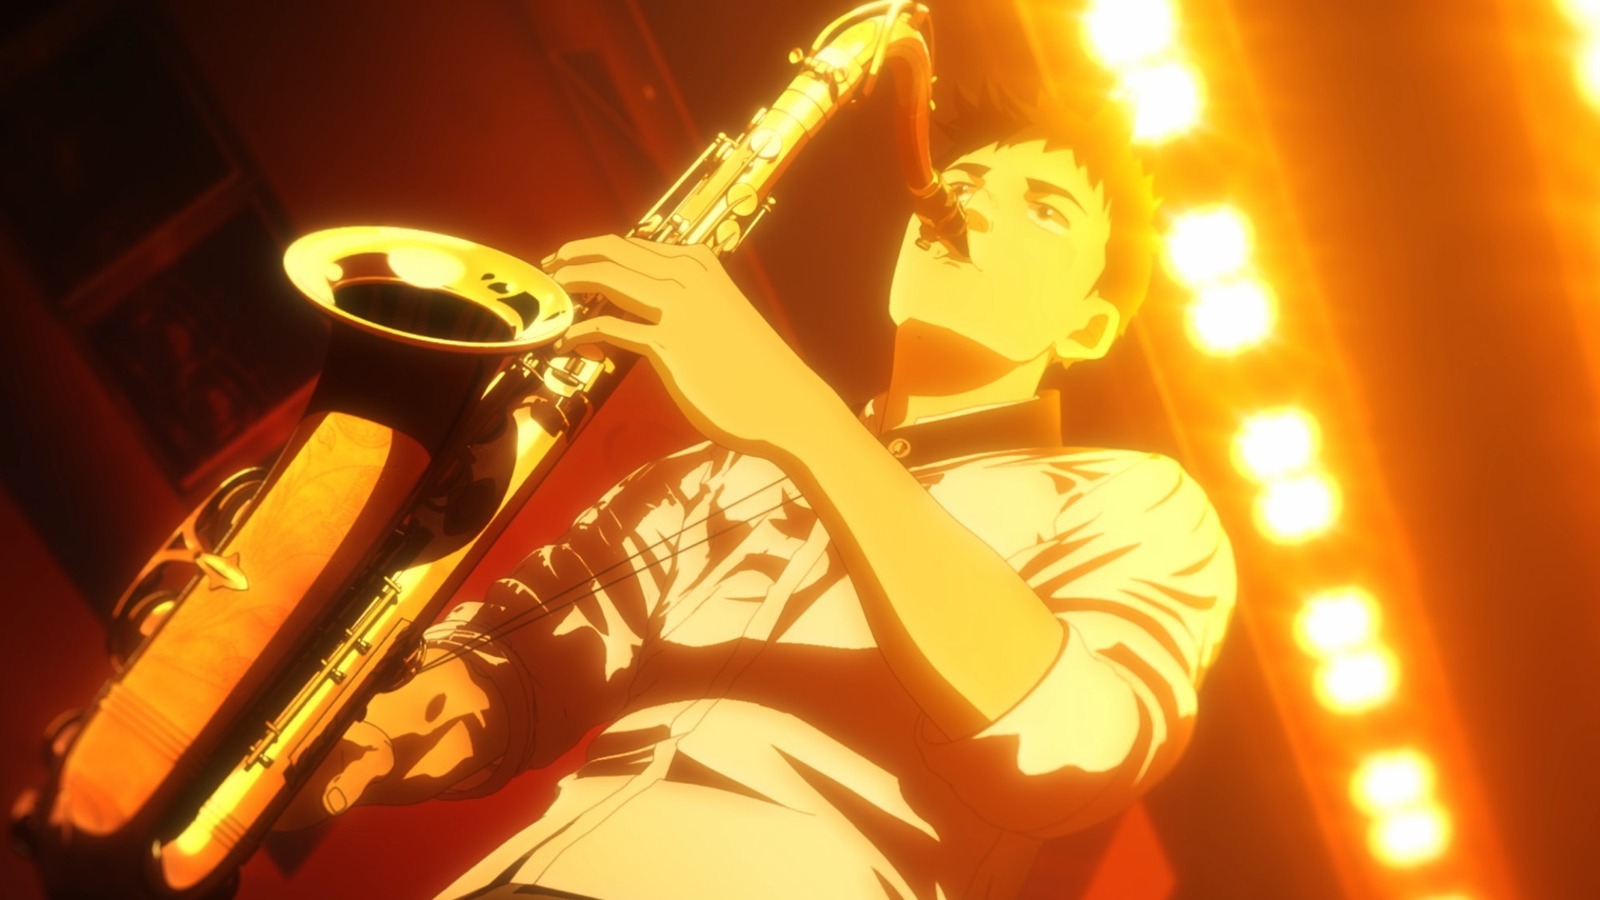 BLUE GIANT Anime Film Gets Jazzed with Teaser Trailer